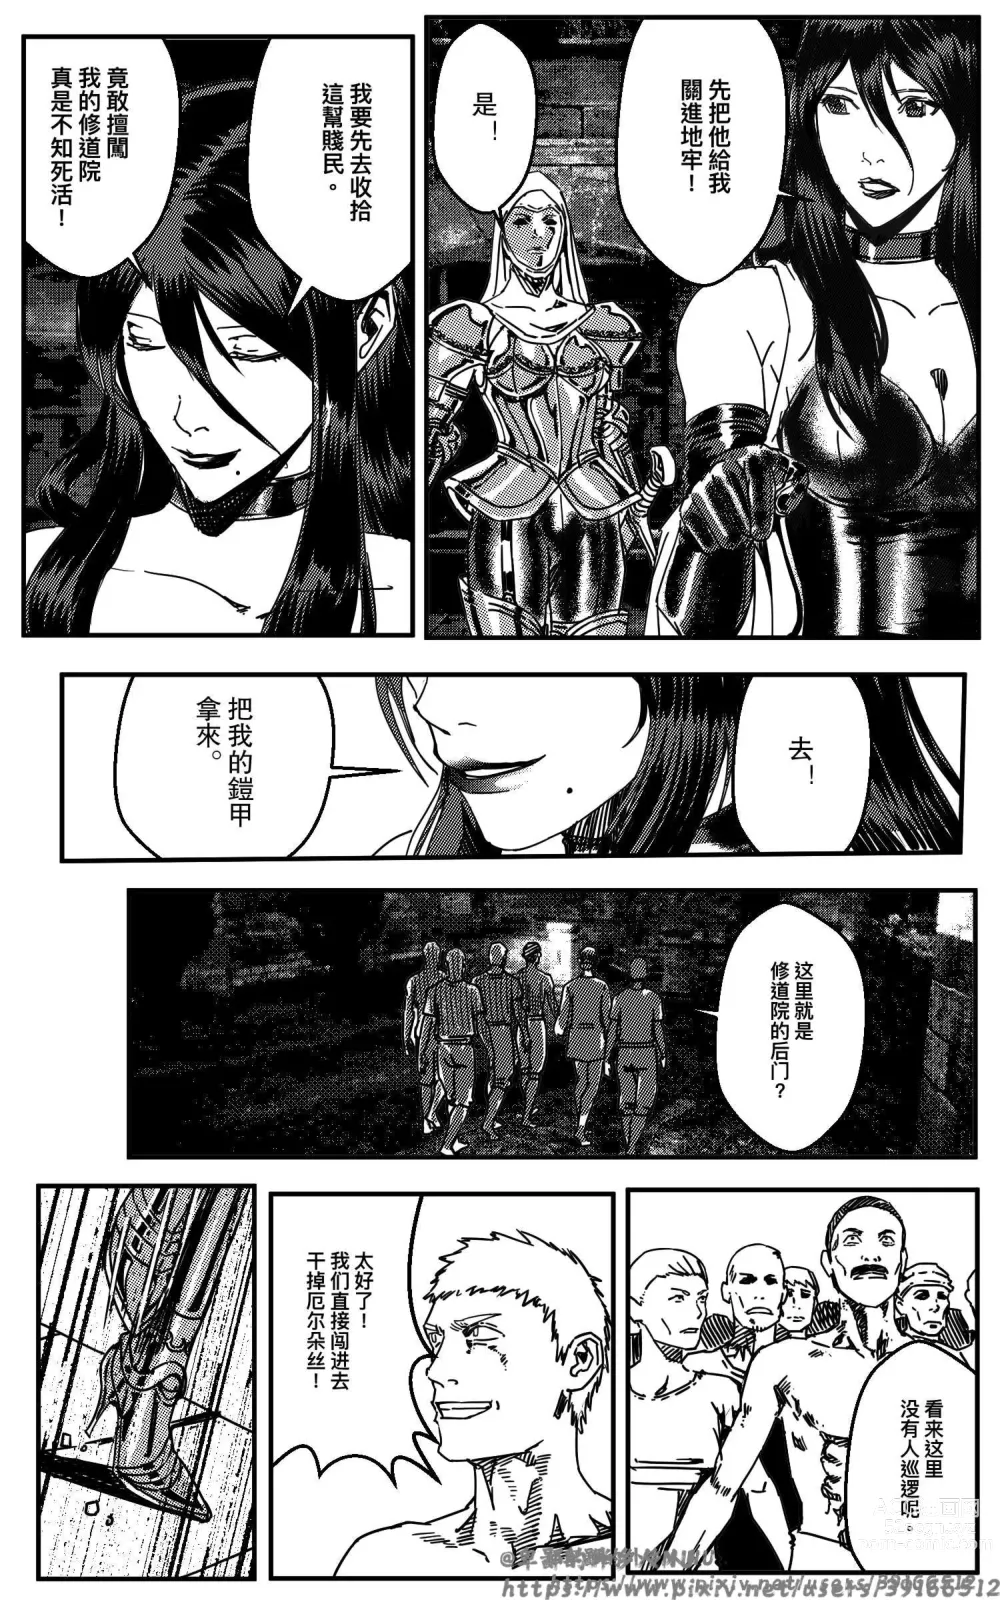 Page 17 of doujinshi 铁处女Ironmaiden EP17-48